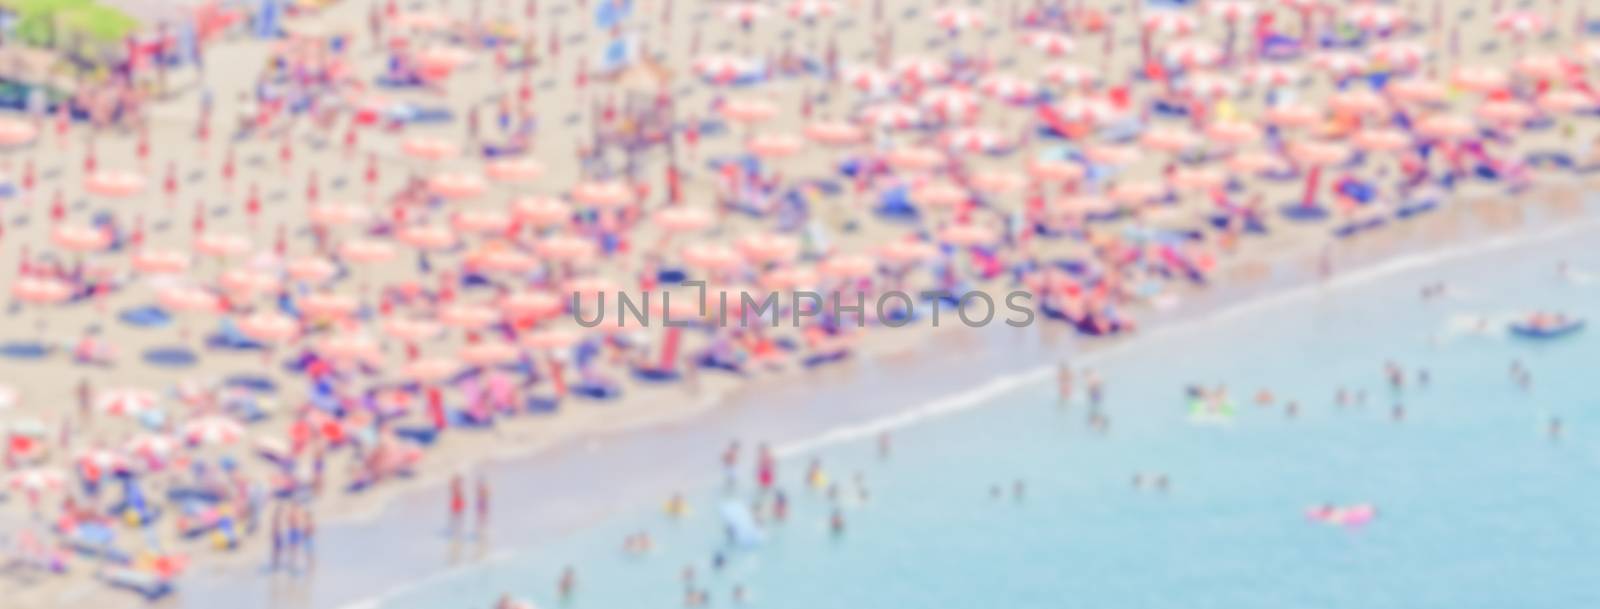 Defocused background with a crowded beach in  Italy. Intentionally blurred post production for bokeh effect